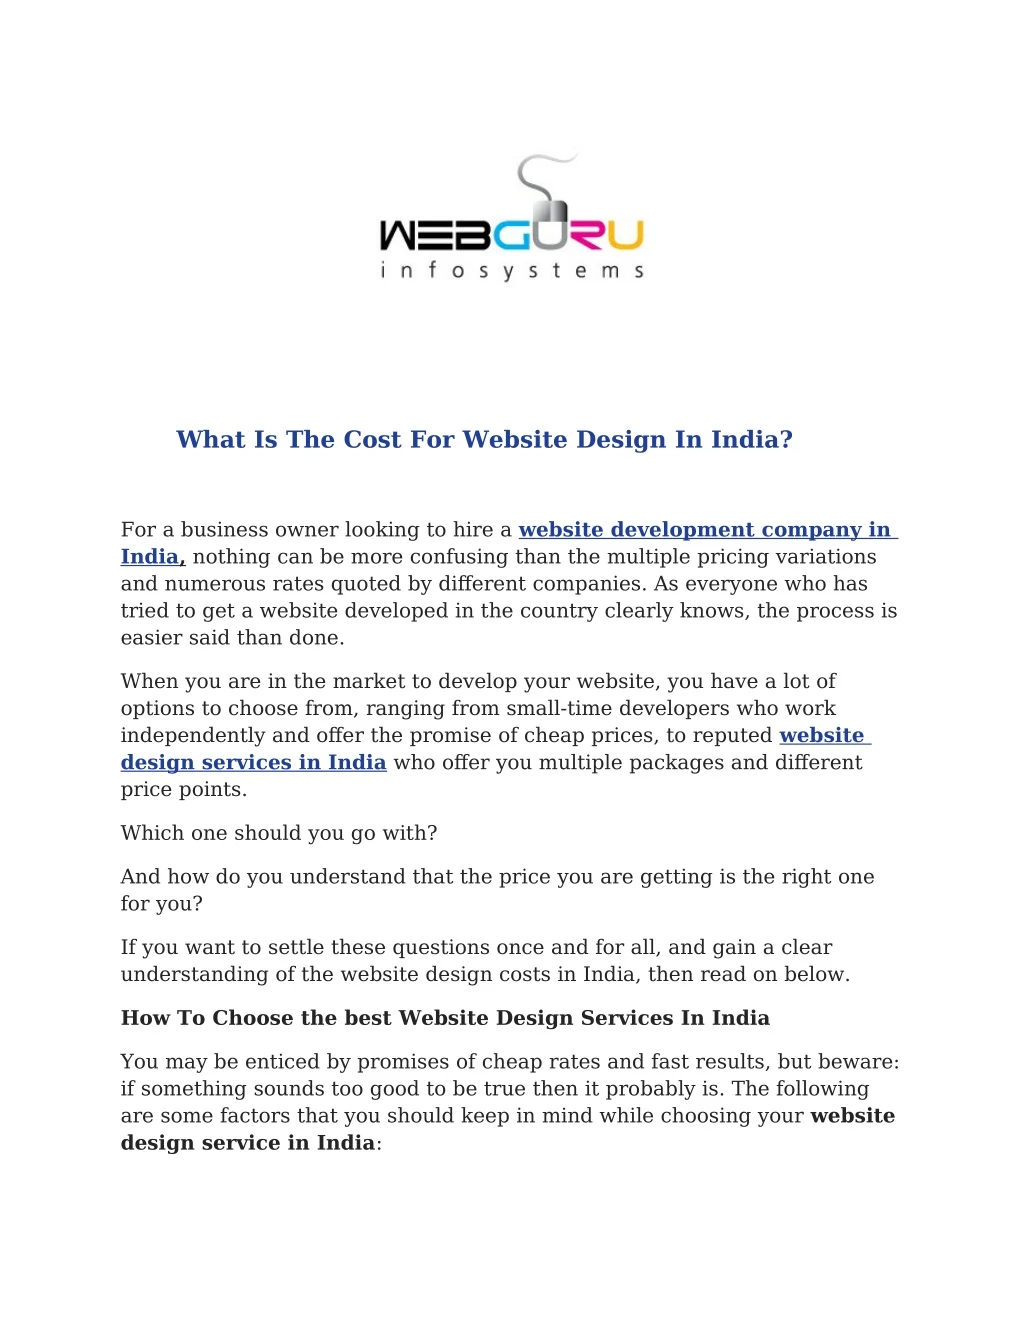 what is the cost for website design in india